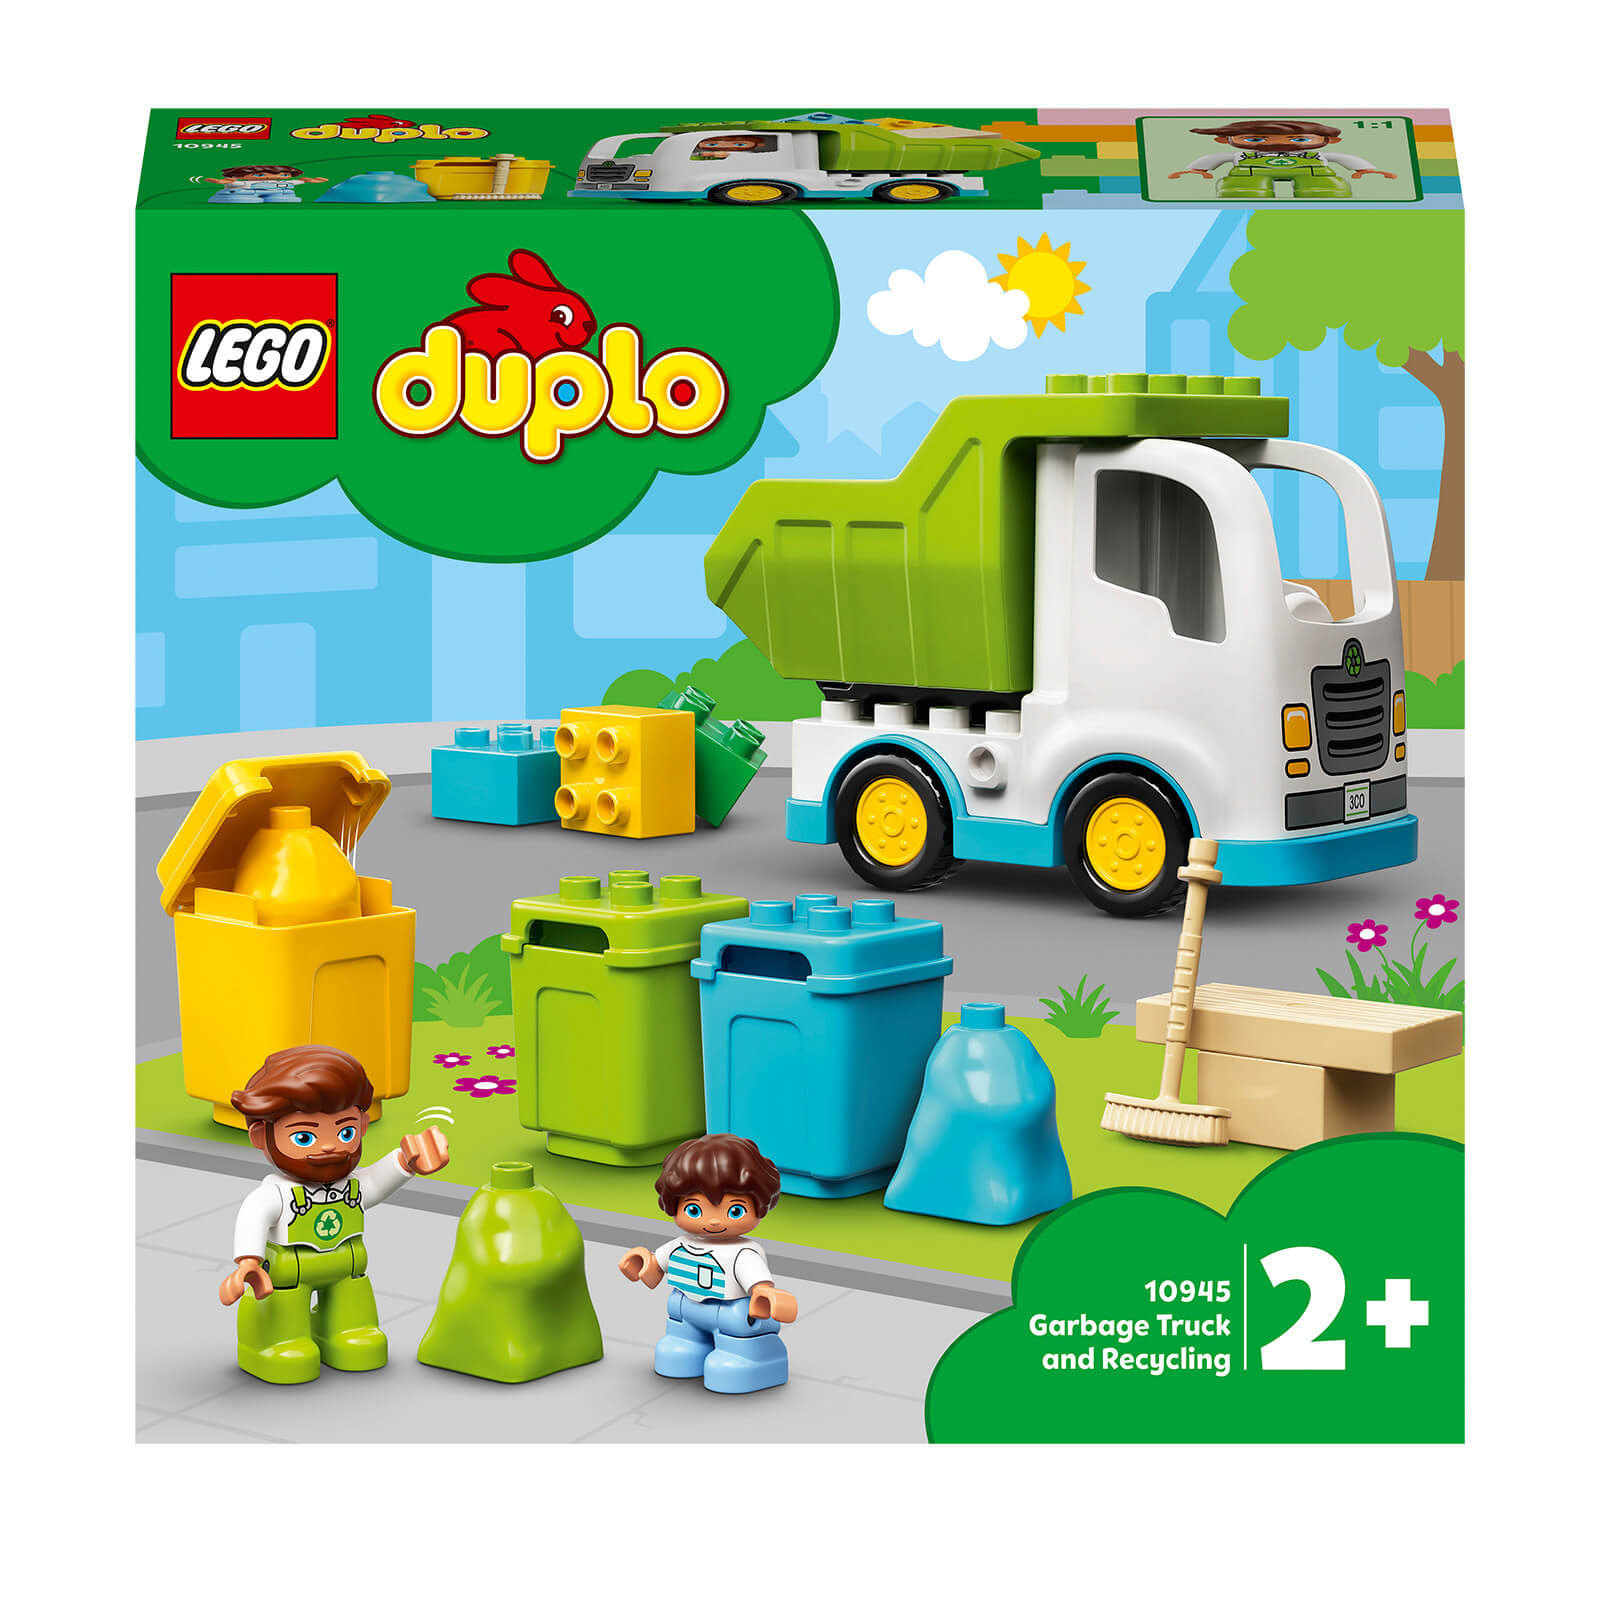 LEGO DUPLO Town Garbage Truck and Recycling Toy for Toddlers (10945)